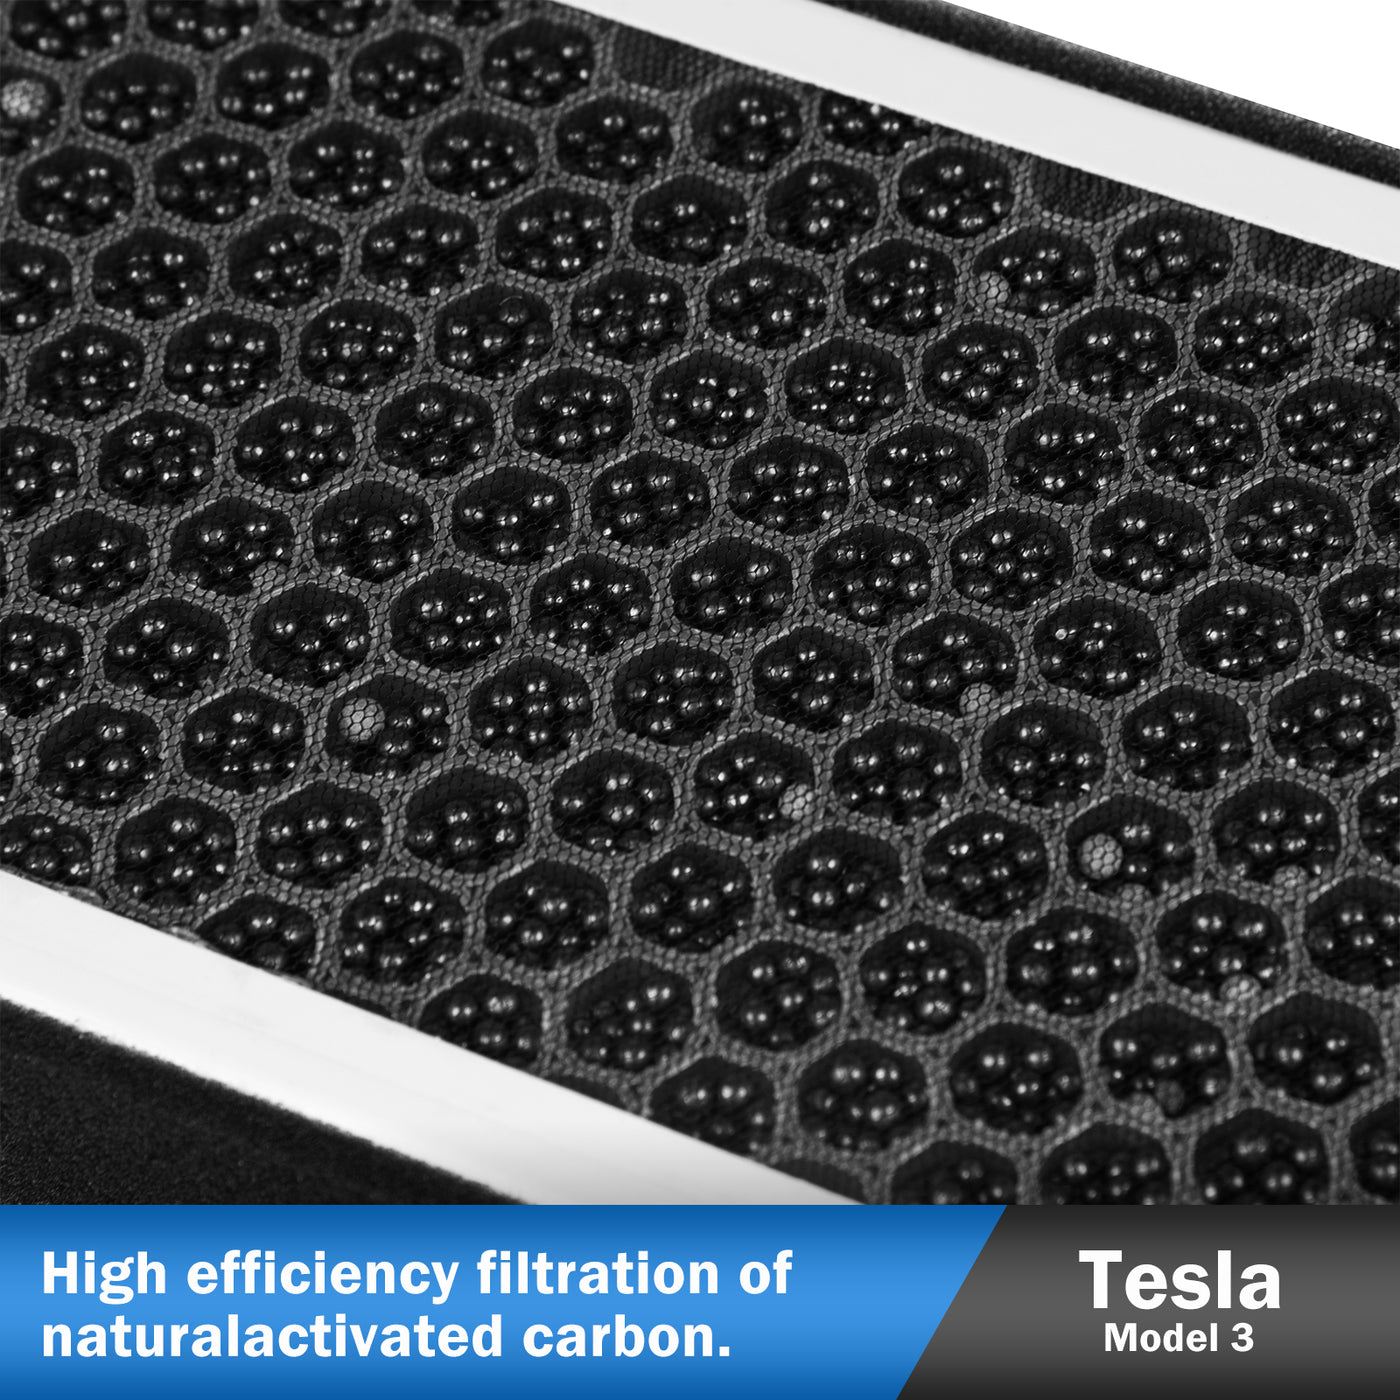 For Tesla Model 3 Y 2017-2023 Filters HEPA Cabin Air Filter Kit Activated  Carbon